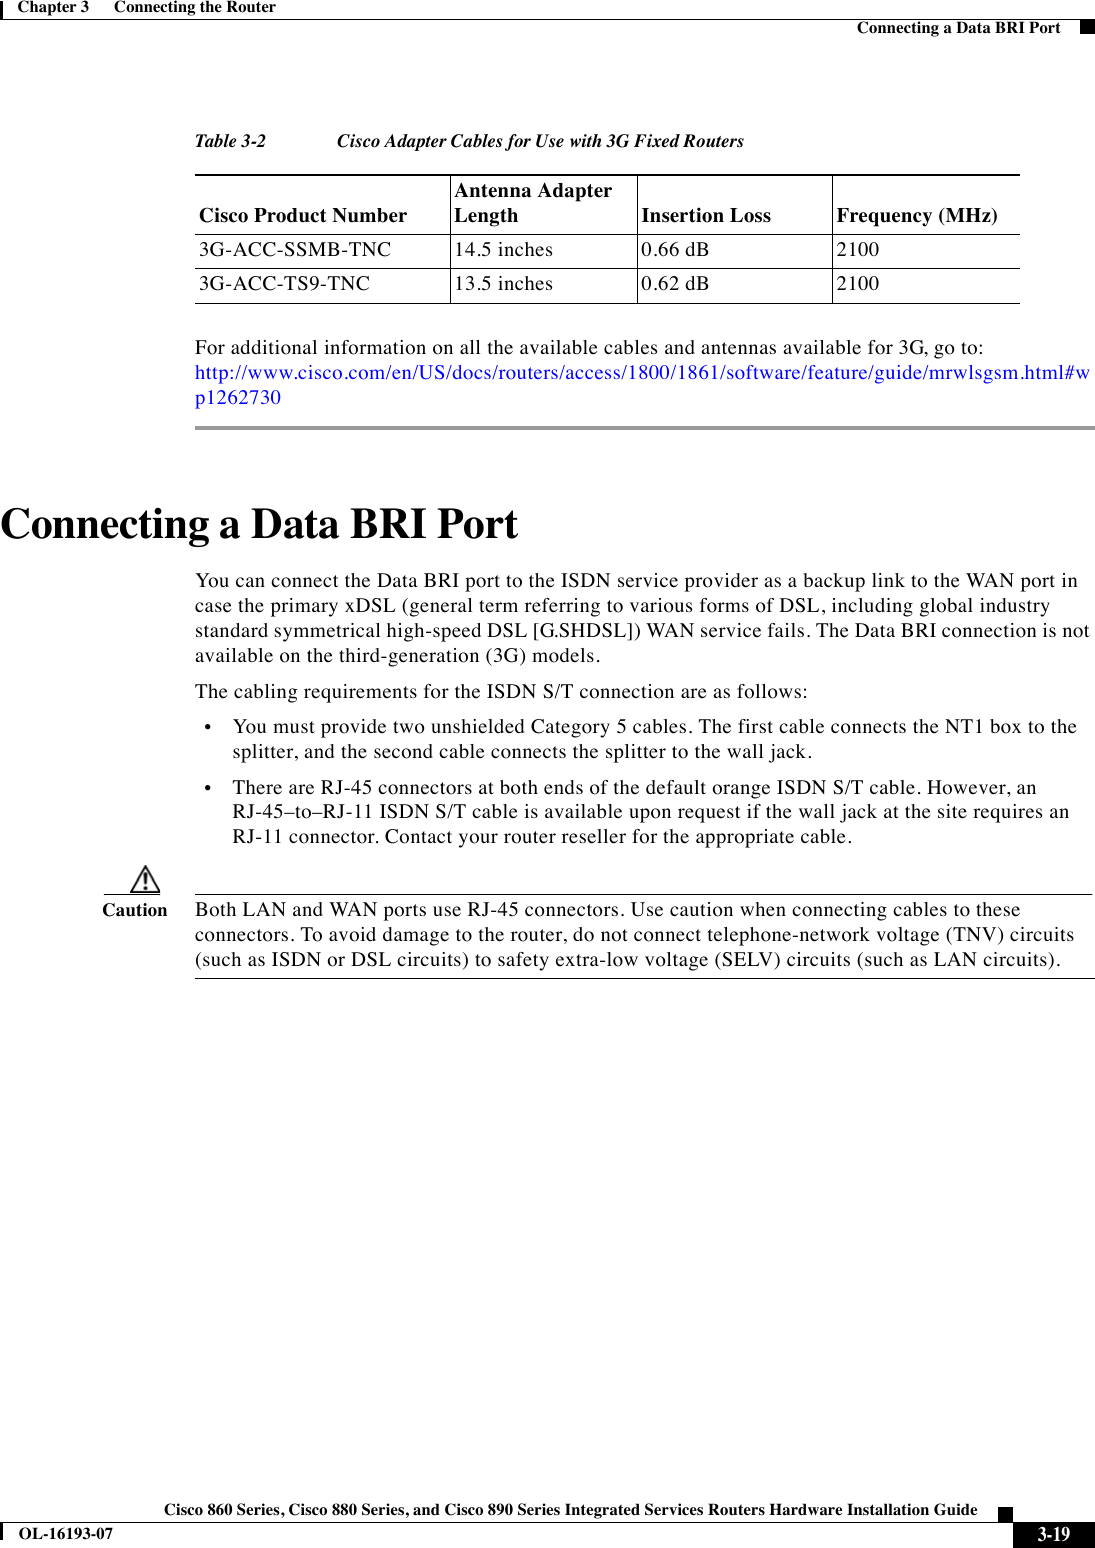  3-19Cisco 860 Series, Cisco 880 Series, and Cisco 890 Series Integrated Services Routers Hardware Installation GuideOL-16193-07Chapter 3      Connecting the Router  Connecting a Data BRI PortFor additional information on all the available cables and antennas available for 3G, go to: http://www.cisco.com/en/US/docs/routers/access/1800/1861/software/feature/guide/mrwlsgsm.html#wp1262730Connecting a Data BRI PortYou can connect the Data BRI port to the ISDN service provider as a backup link to the WAN port in case the primary xDSL (general term referring to various forms of DSL, including global industry standard symmetrical high-speed DSL [G.SHDSL]) WAN service fails. The Data BRI connection is not available on the third-generation (3G) models. The cabling requirements for the ISDN S/T connection are as follows:  •You must provide two unshielded Category 5 cables. The first cable connects the NT1 box to the splitter, and the second cable connects the splitter to the wall jack.  •There are RJ-45 connectors at both ends of the default orange ISDN S/T cable. However, an RJ-45–to–RJ-11 ISDN S/T cable is available upon request if the wall jack at the site requires an RJ-11 connector. Contact your router reseller for the appropriate cable.CautionBoth LAN and WAN ports use RJ-45 connectors. Use caution when connecting cables to these connectors. To avoid damage to the router, do not connect telephone-network voltage (TNV) circuits (such as ISDN or DSL circuits) to safety extra-low voltage (SELV) circuits (such as LAN circuits). Tabl e 3-2 Cisco Adapter Cables for Use with 3G Fixed Routers Cisco Product NumberAntenna Adapter Length Insertion Loss Frequency (MHz)3G-ACC-SSMB-TNC 14.5 inches 0.66 dB 2100 3G-ACC-TS9-TNC 13.5 inches 0.62 dB 2100